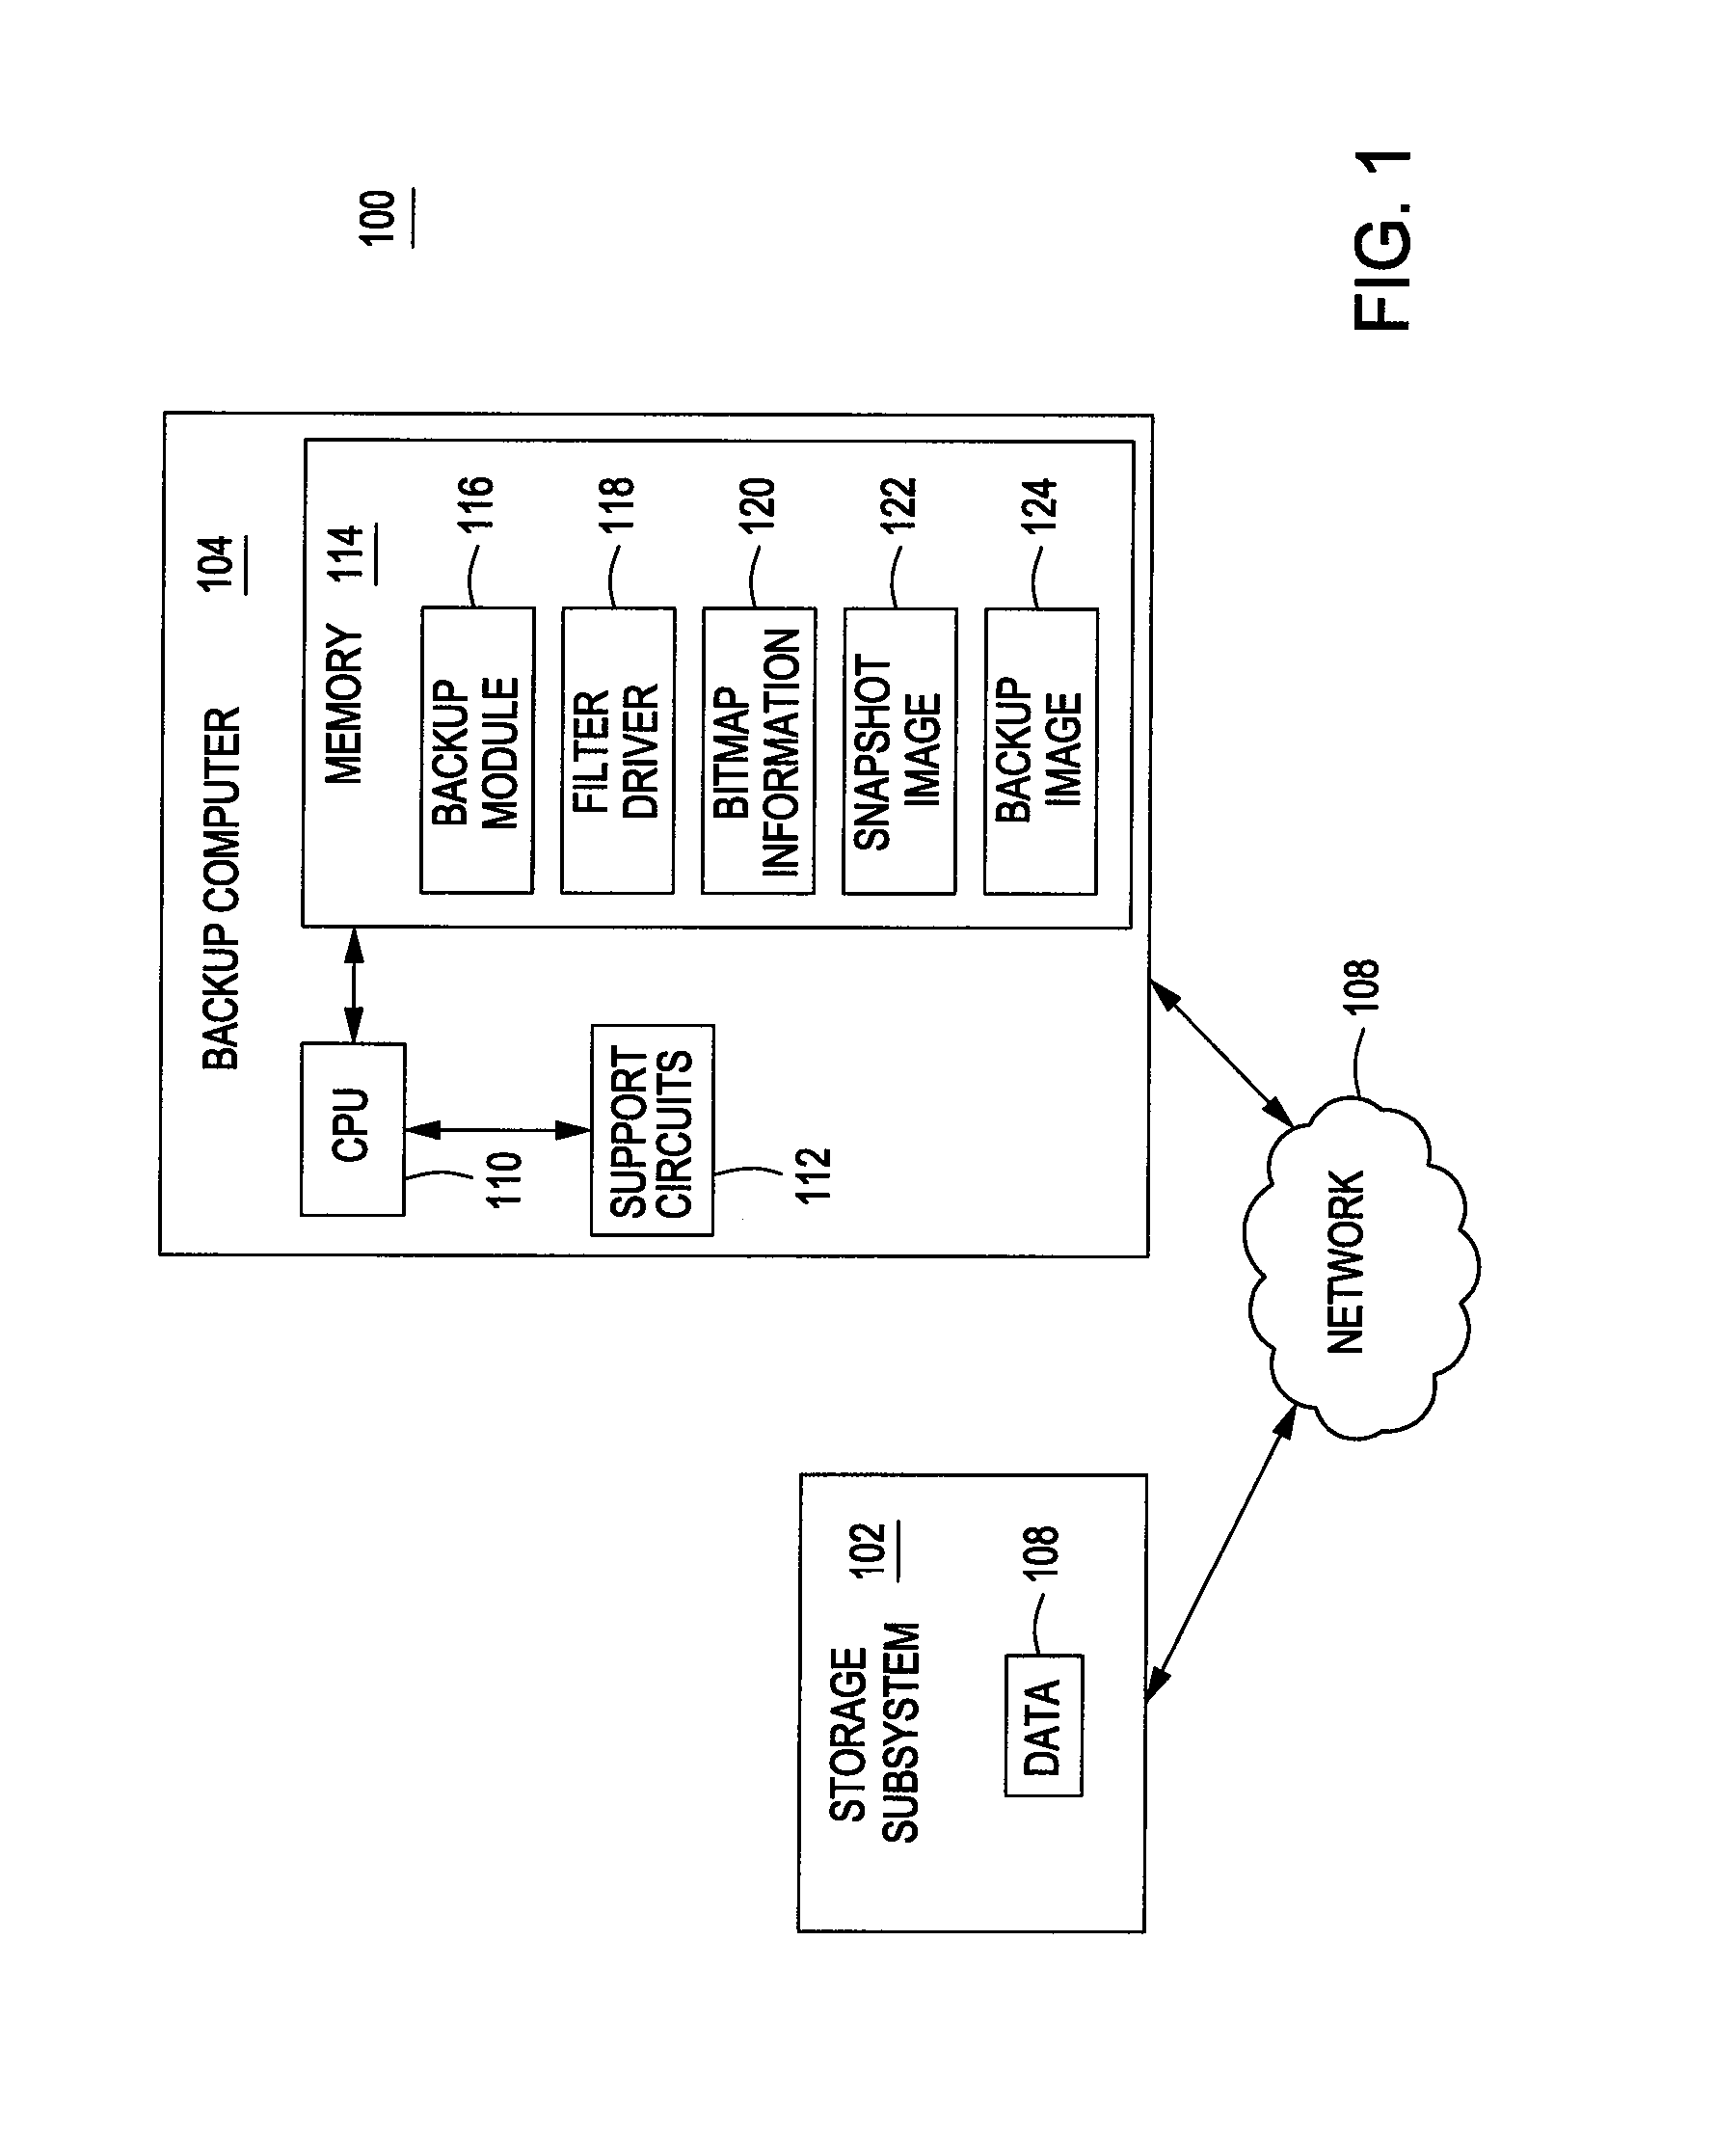 Method and apparatus for providing point-in-time backup images